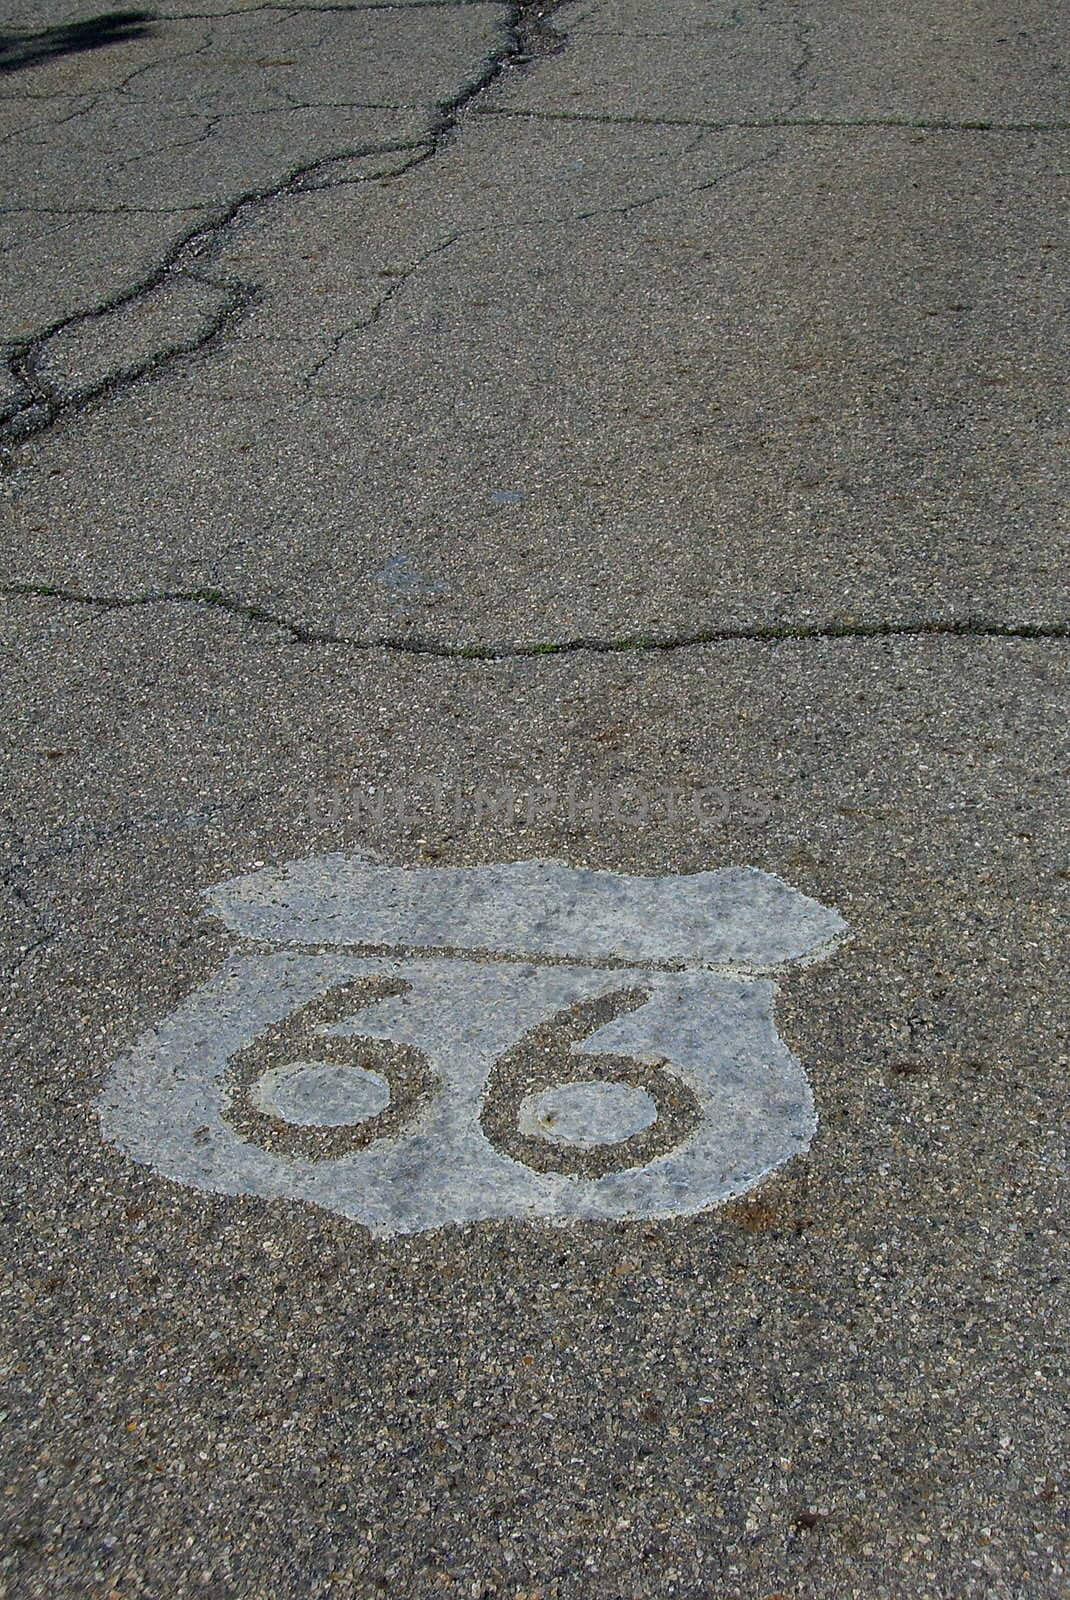 Rt. 66 shield painted on old, decaying highway